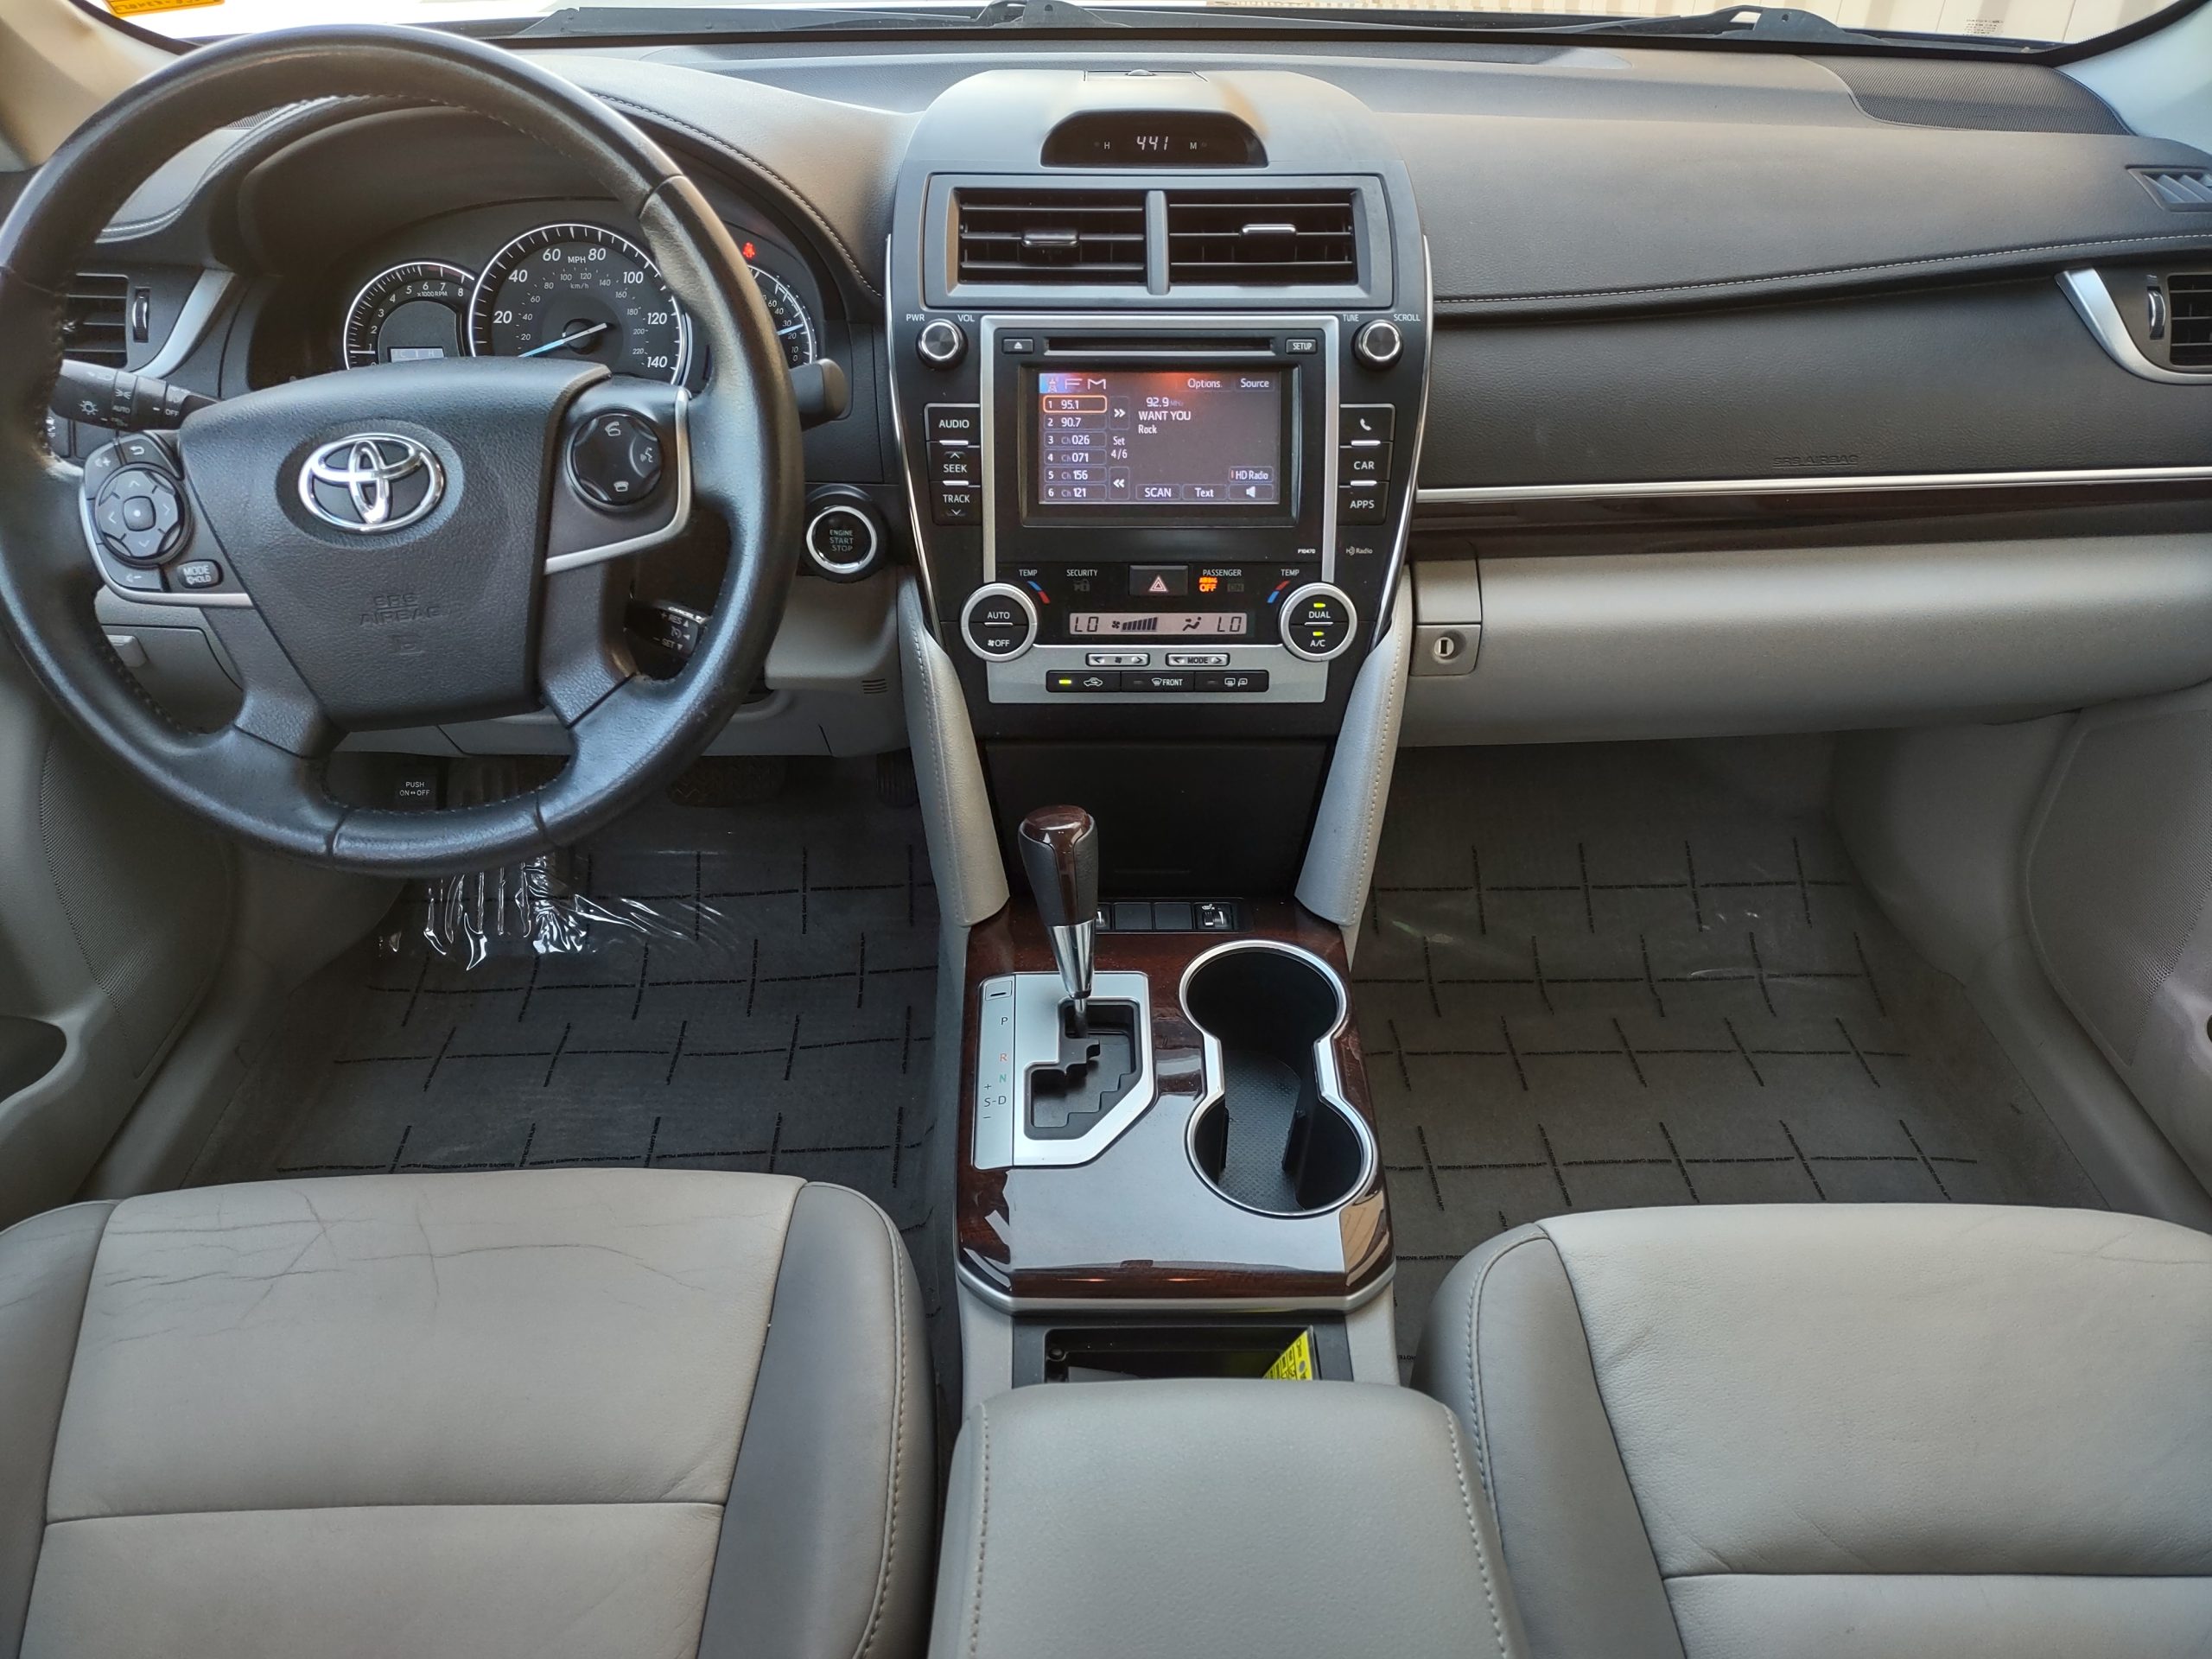 Used 2013 Toyota Camry SE Sedan for sale in 